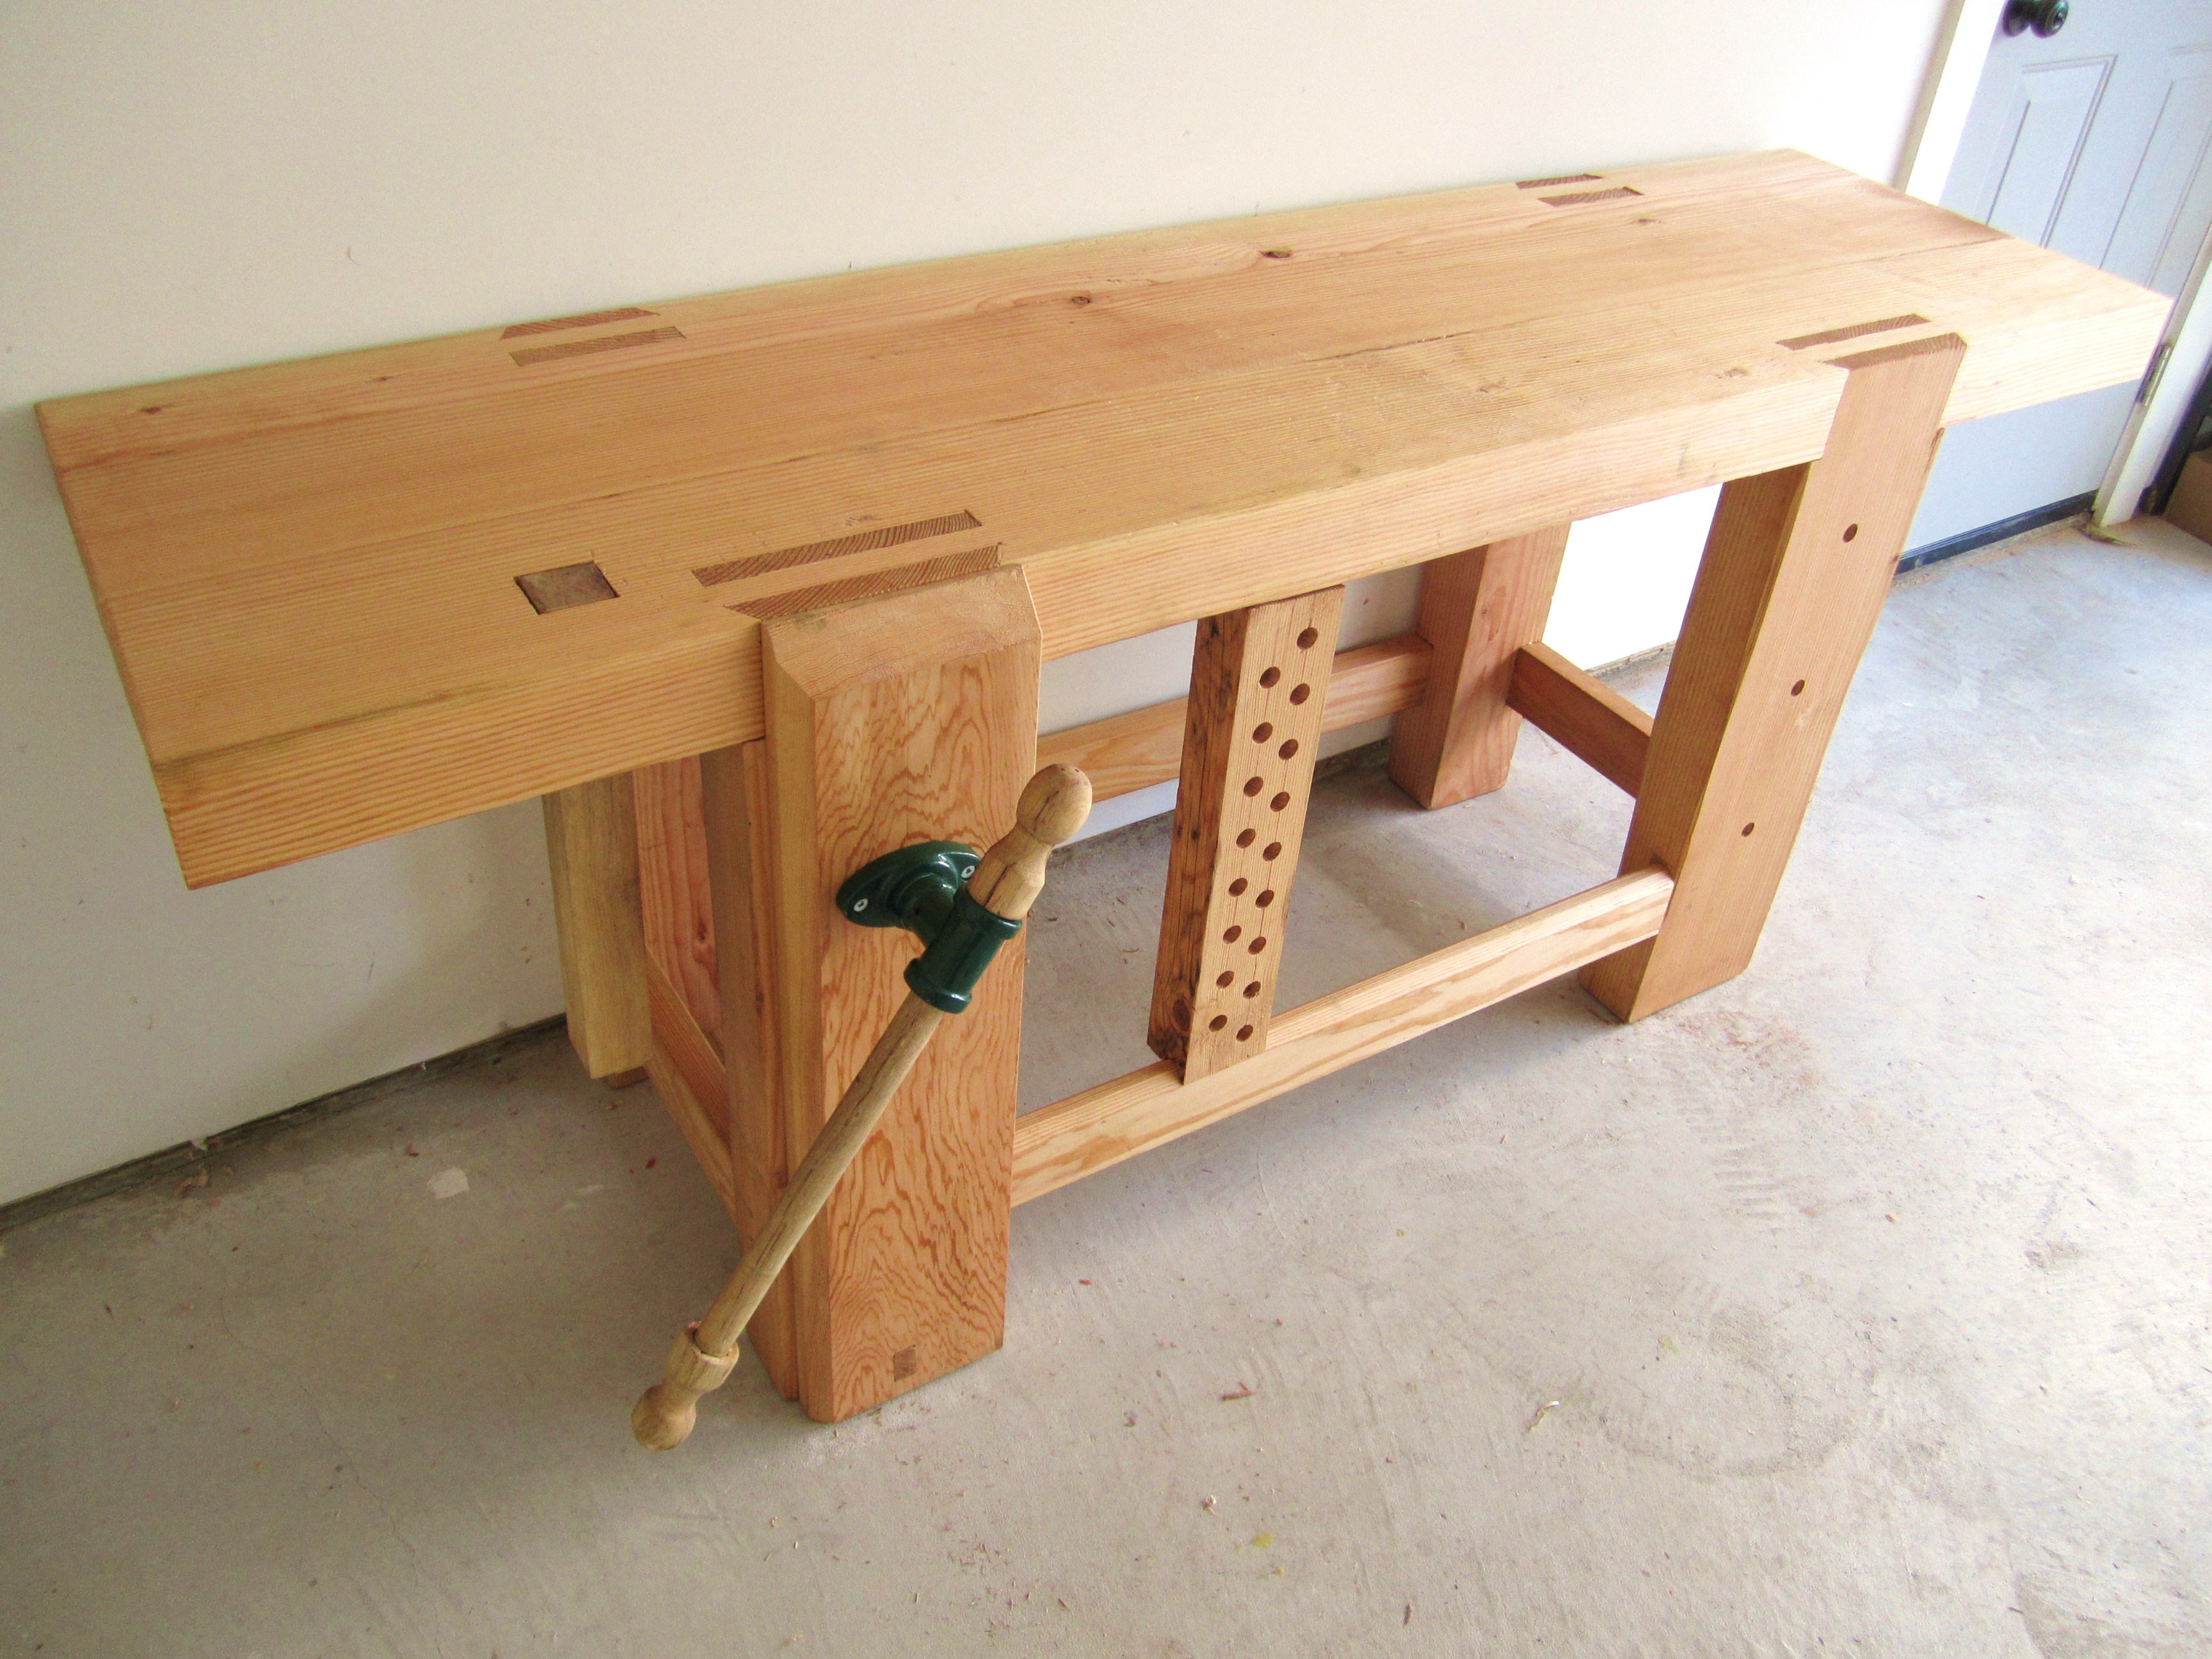 Completed Roubo workbench T r i a l E r r o r